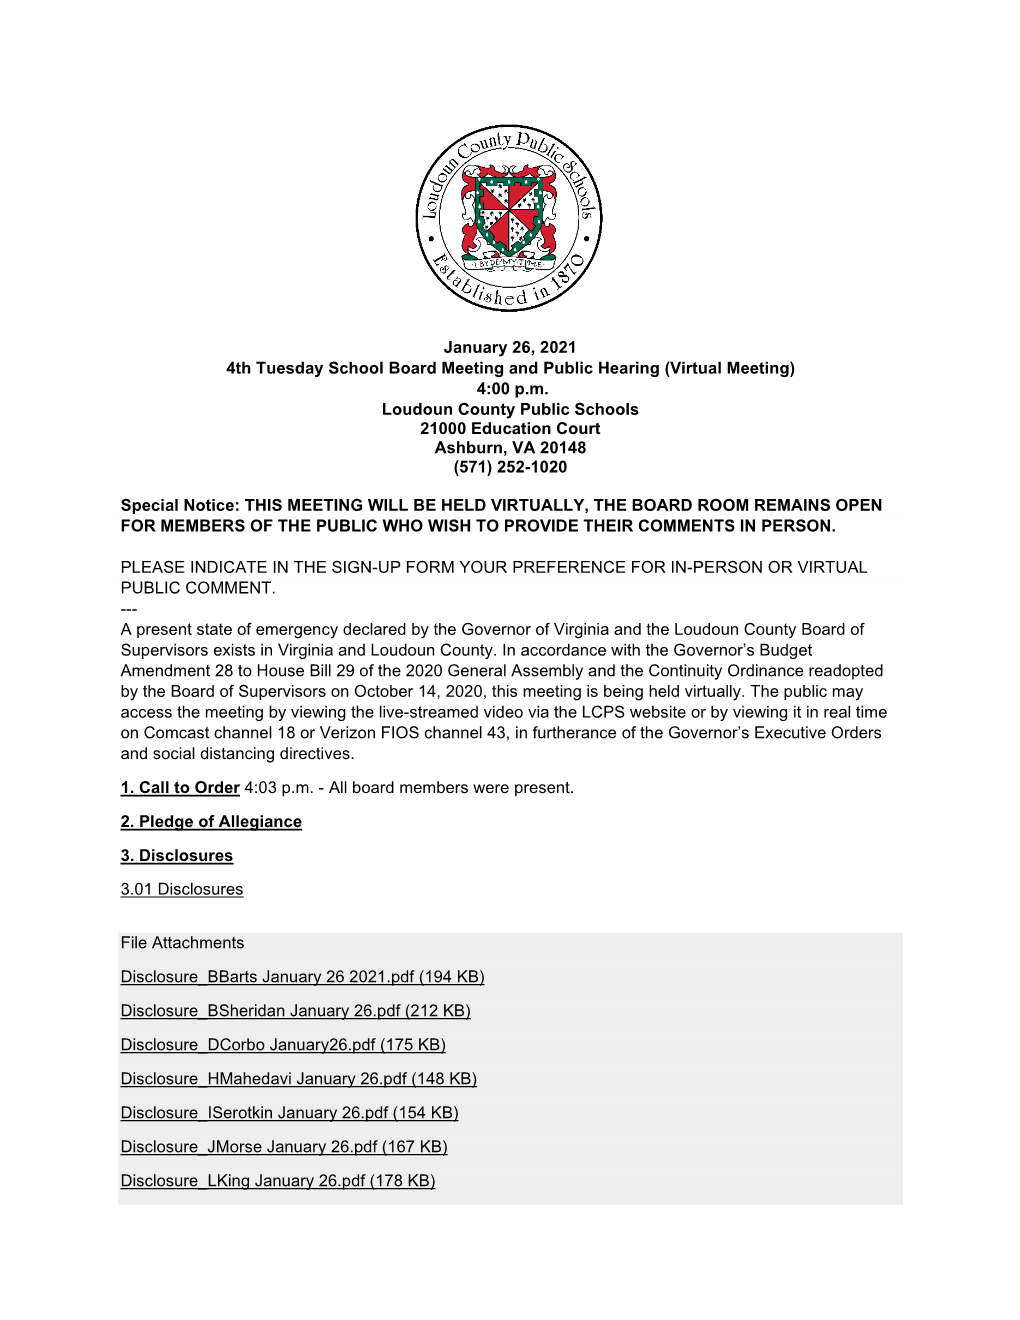 January 26, 2021 4Th Tuesday School Board Meeting and Public Hearing (Virtual Meeting) 4:00 P.M